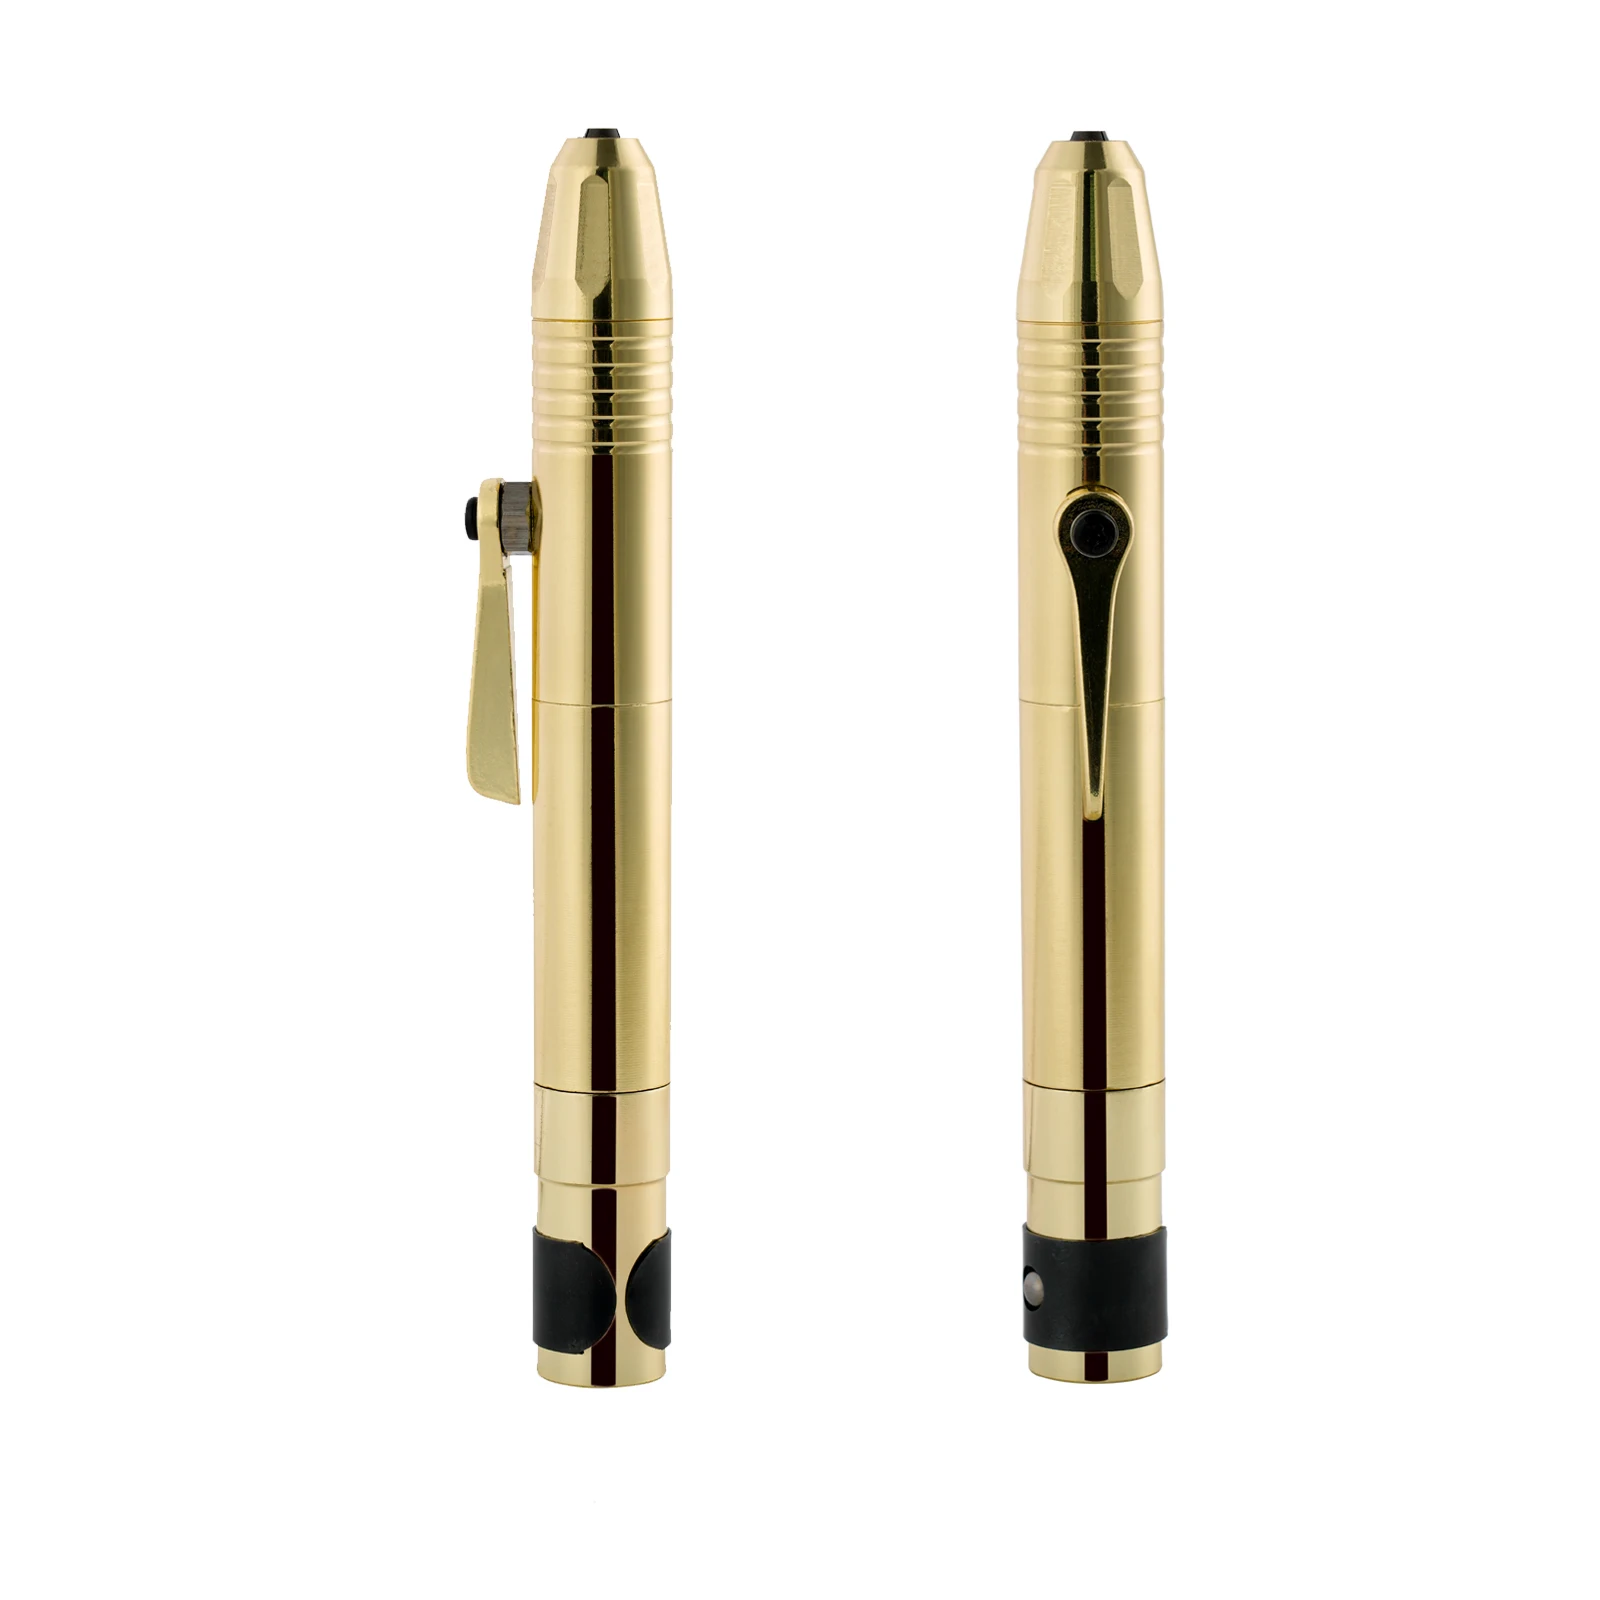 DZQ Quick Change Handpiece Gold Color Good Control for Making Smooth Cuts Compatible with Rotary Grinder Tool